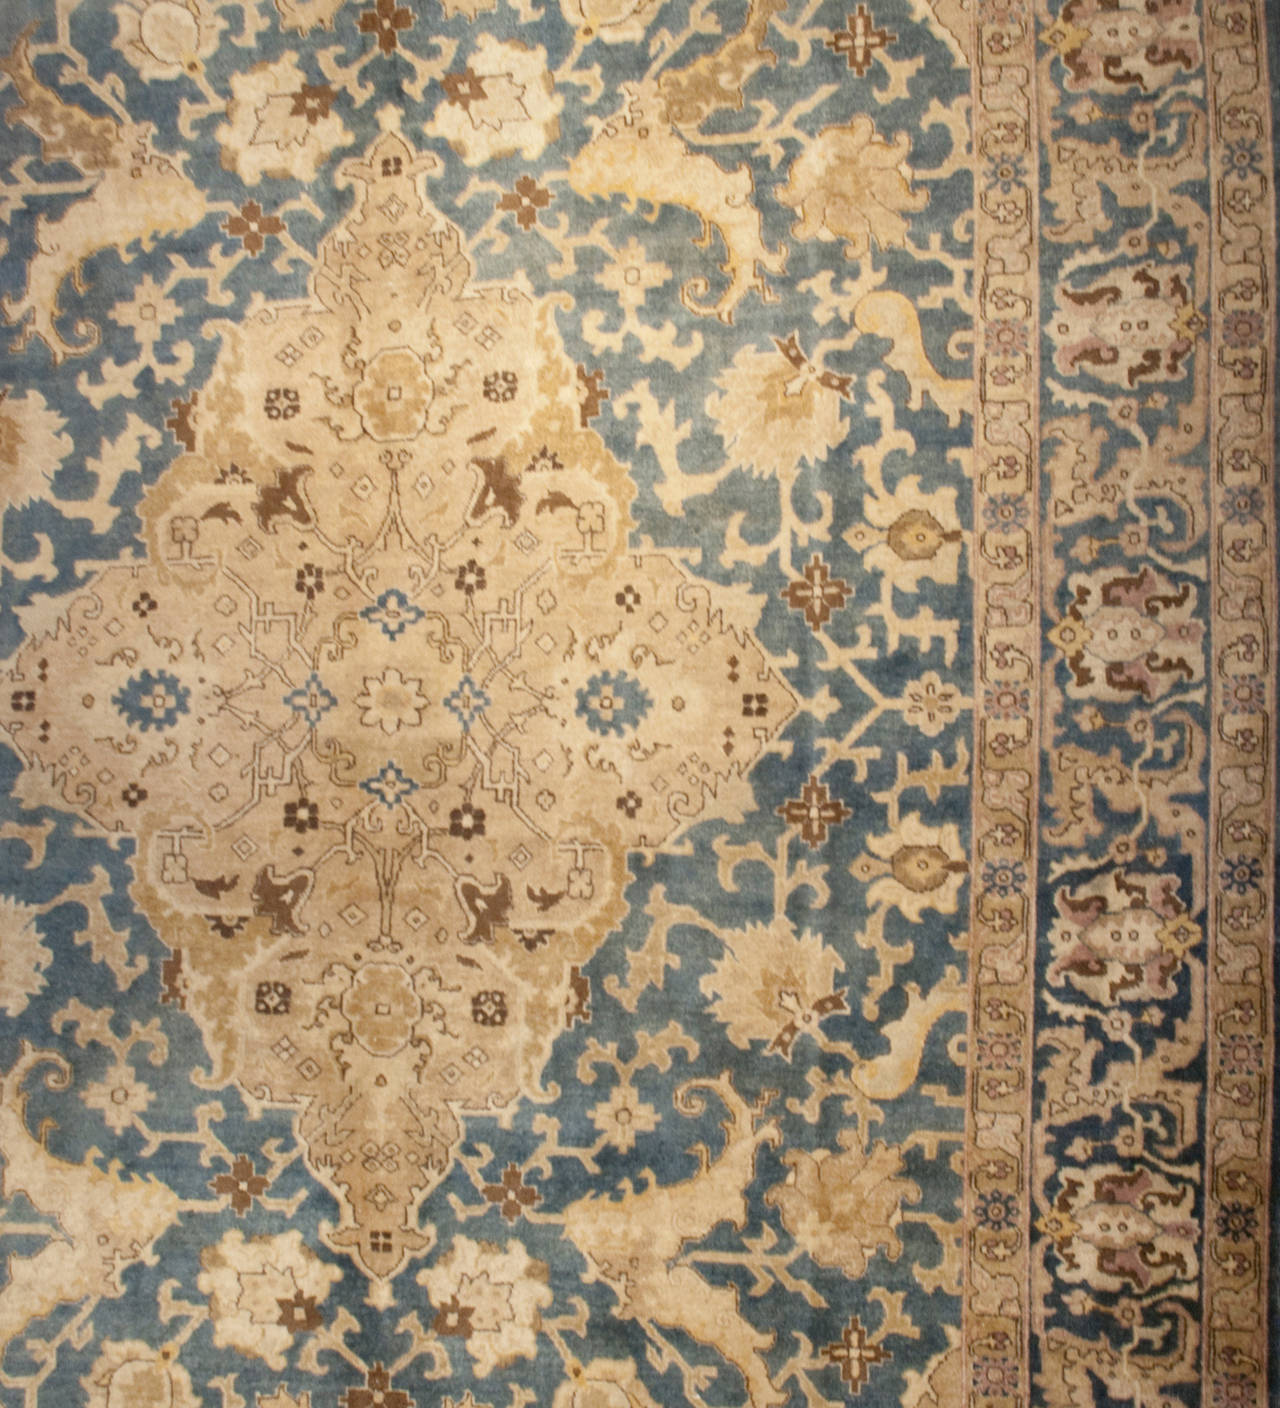 An early 20th century Persian Tabriz rug with a large central medallion on a beautiful all-over scrolling vine and field of flowers surrounded by multiple complementary floral borders.